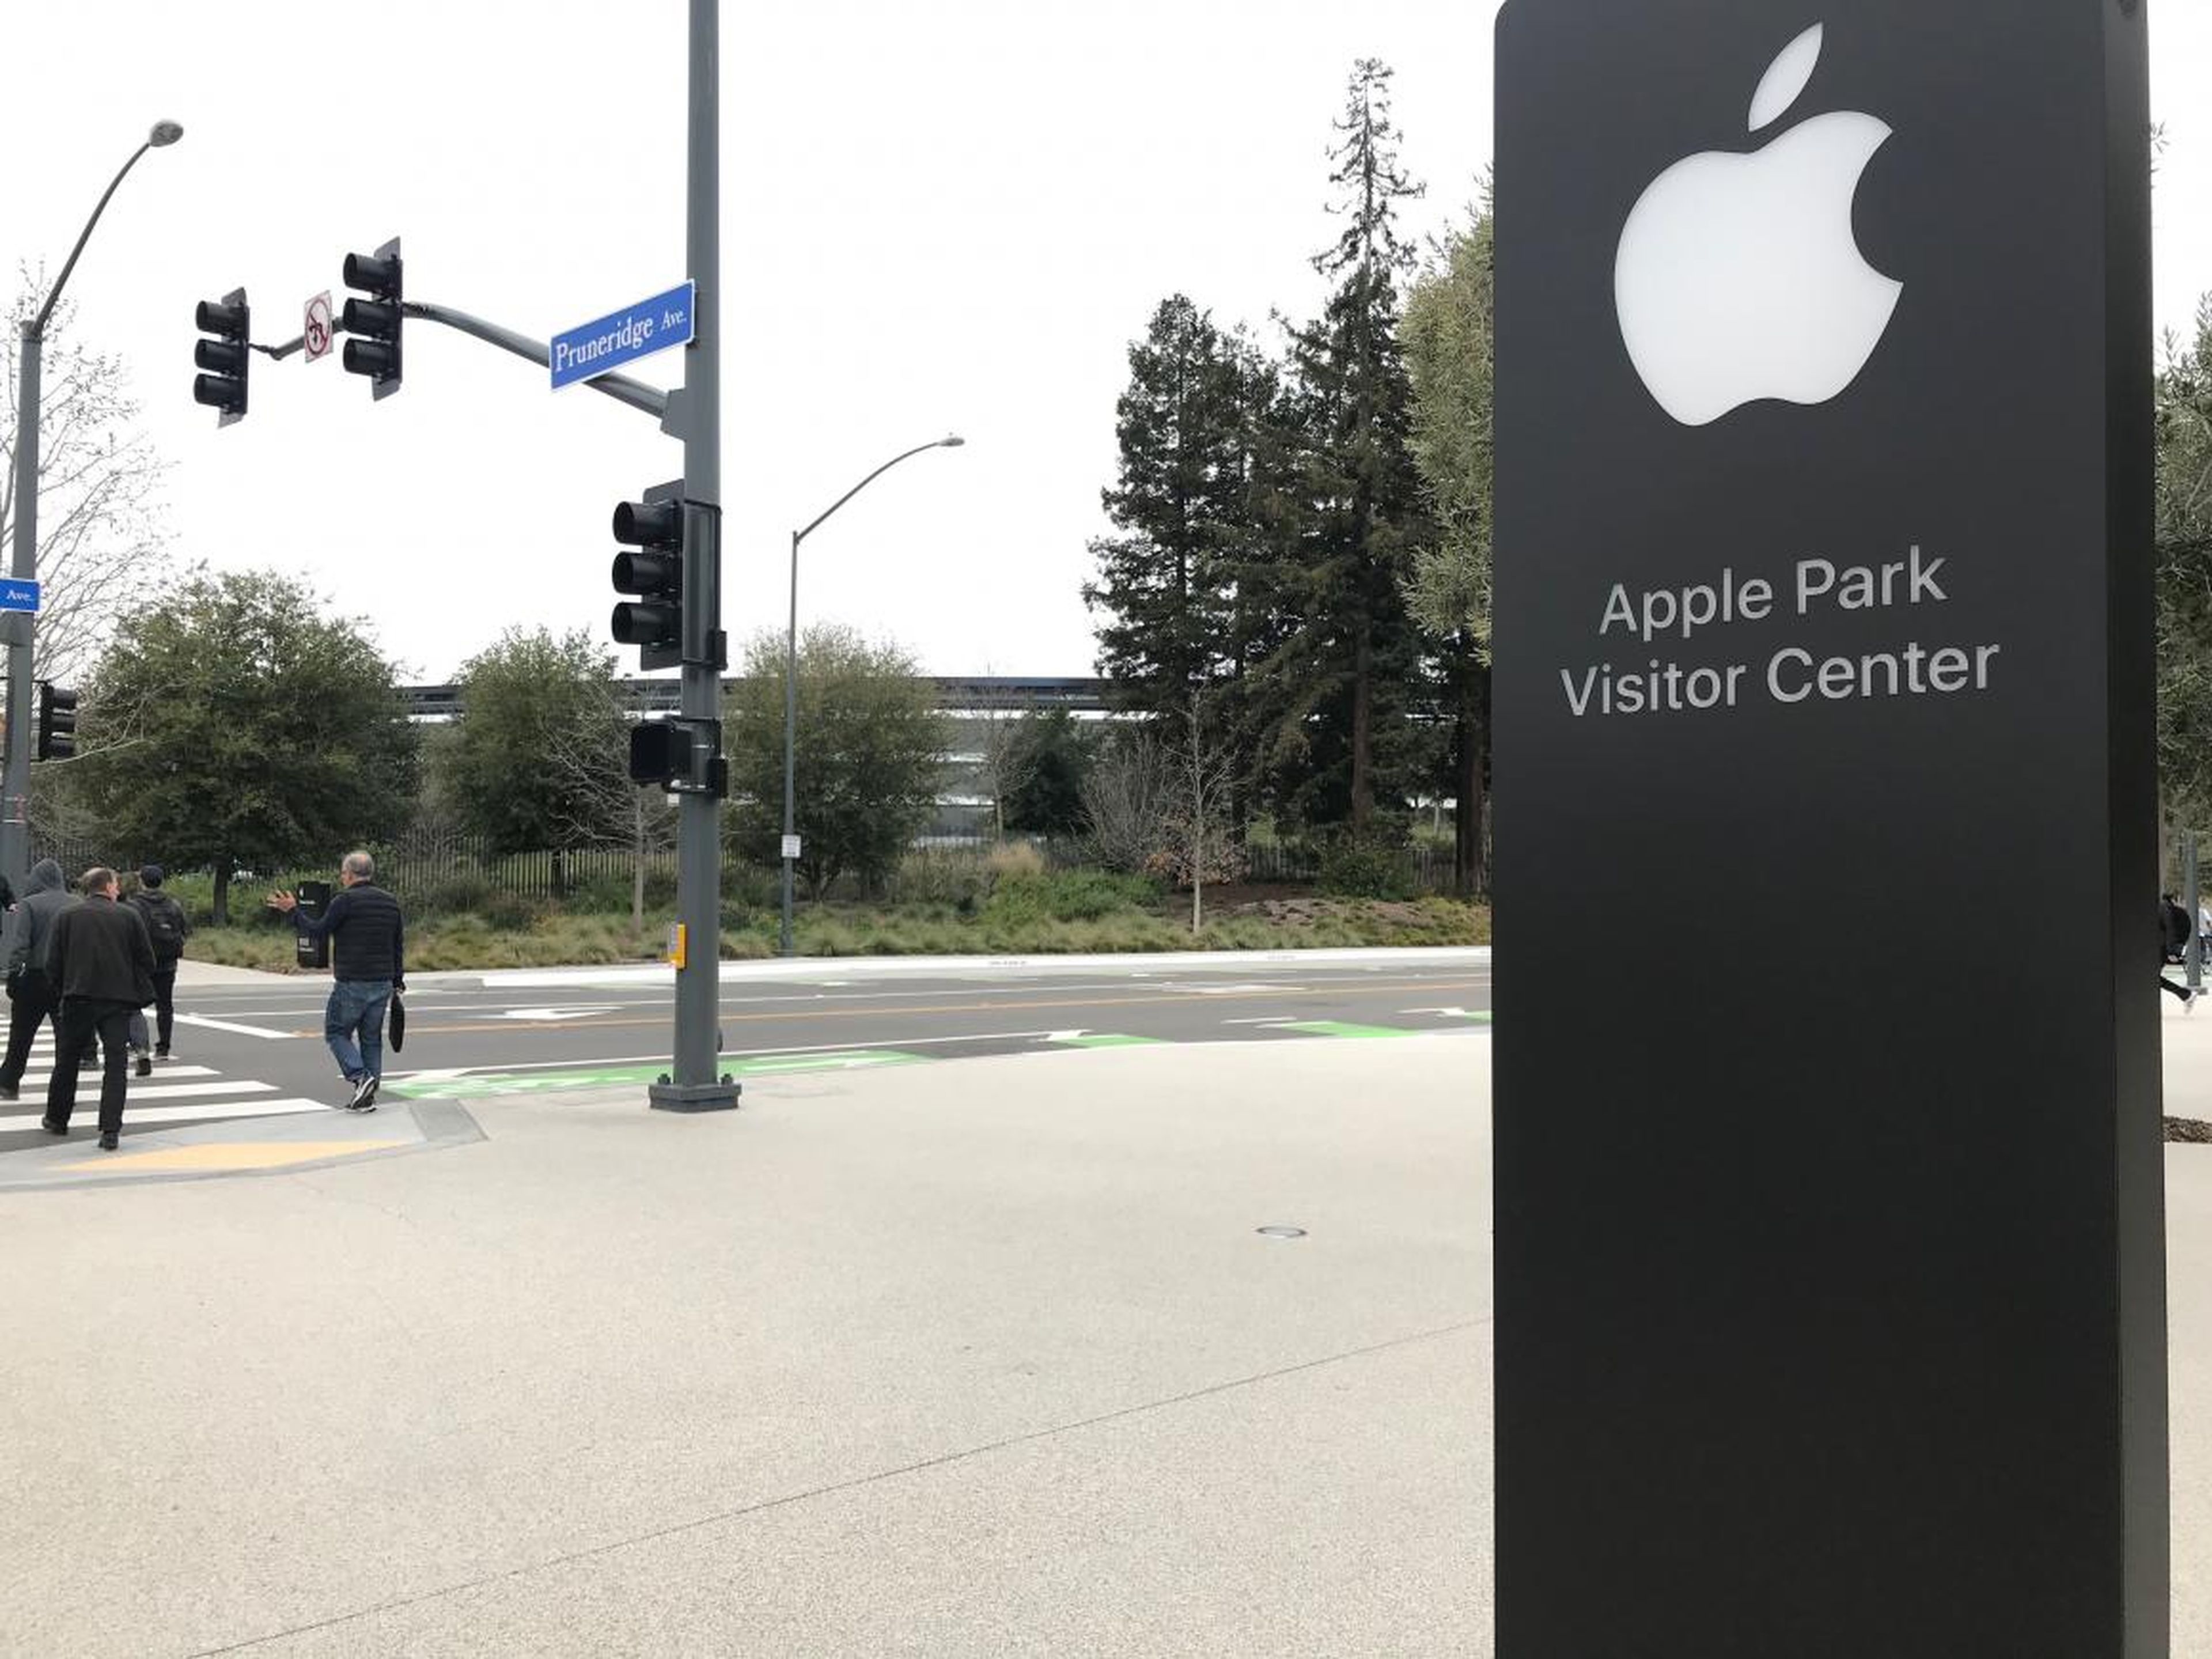 Apple's visitor center is right across the street from Apple Park, spaceship headquarters.